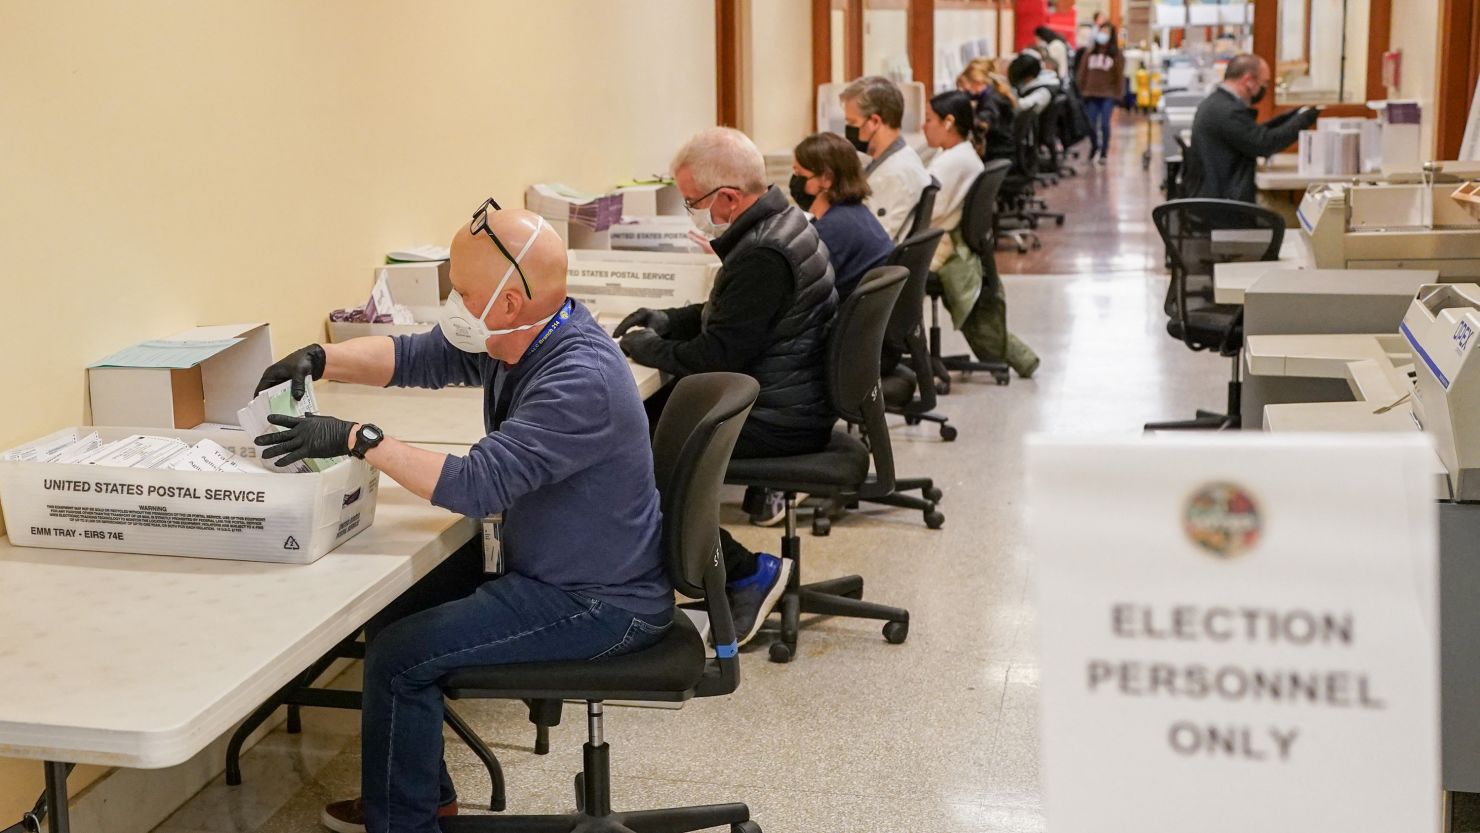 Election personnel process ballots at the San Francisco City Hall voting center during early voting before the Super Tuesday primary election.